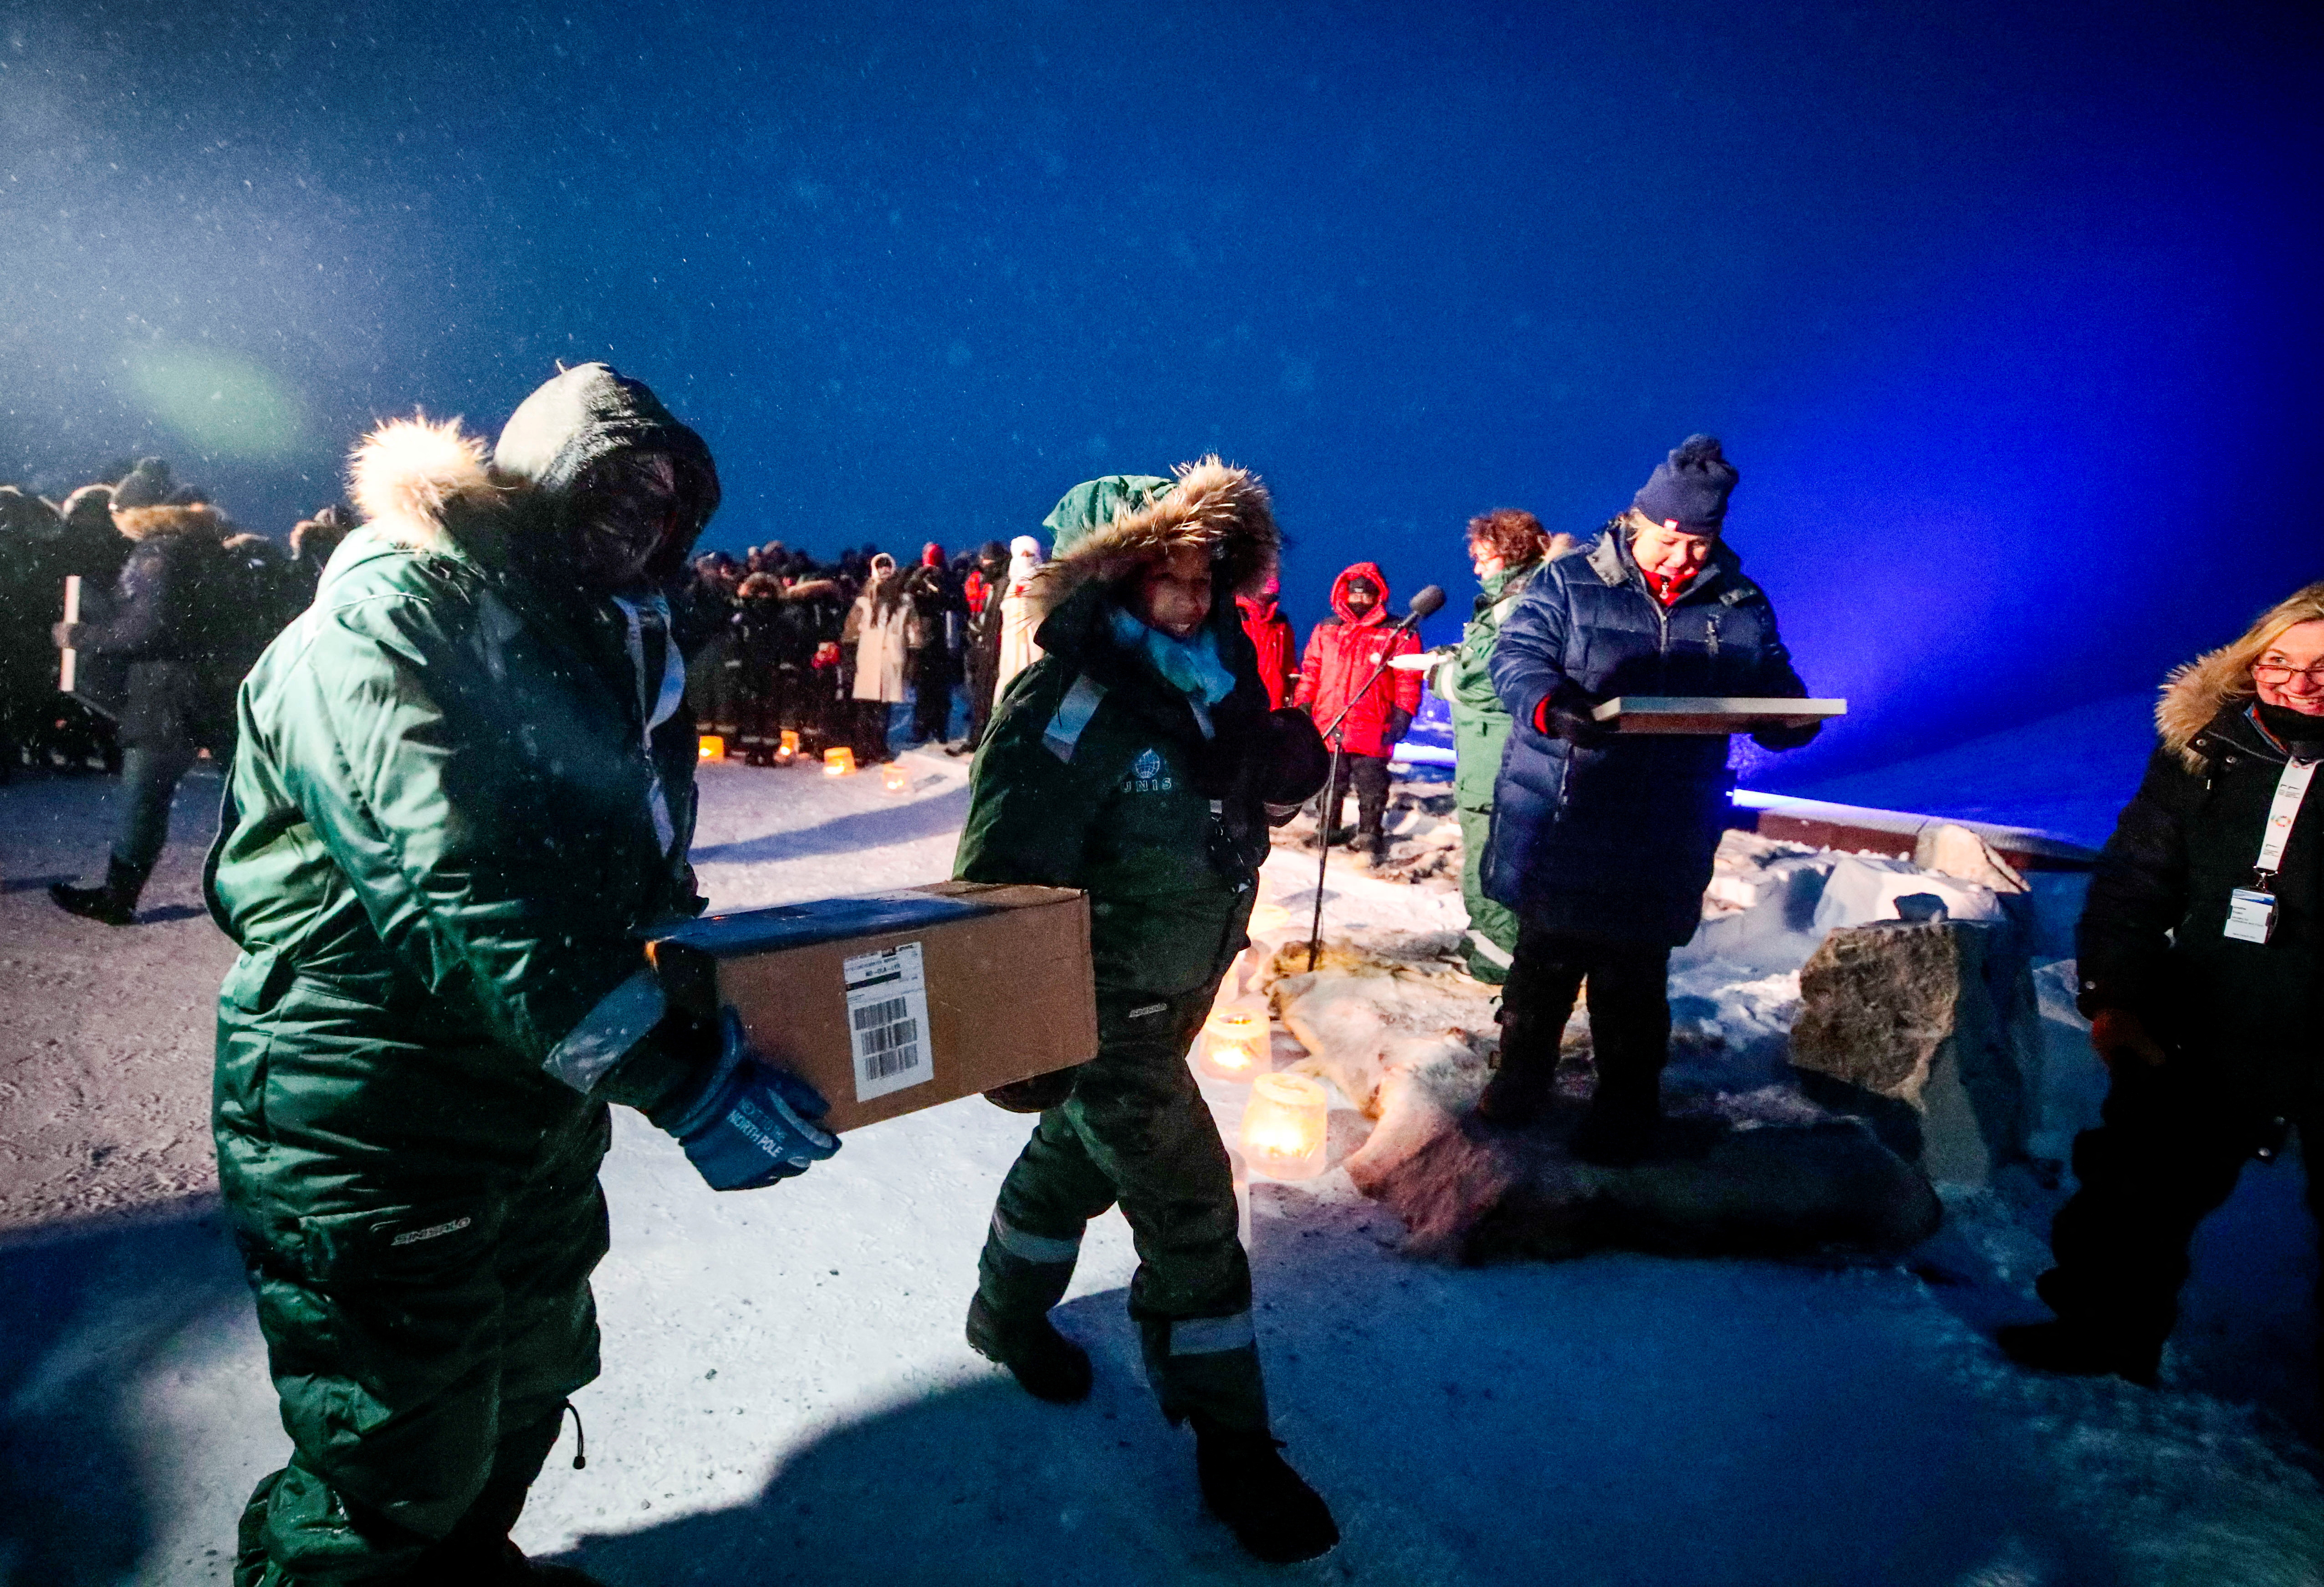 Representatives from many countries and universities arrive in Svalbard's global seed vault with new seeds